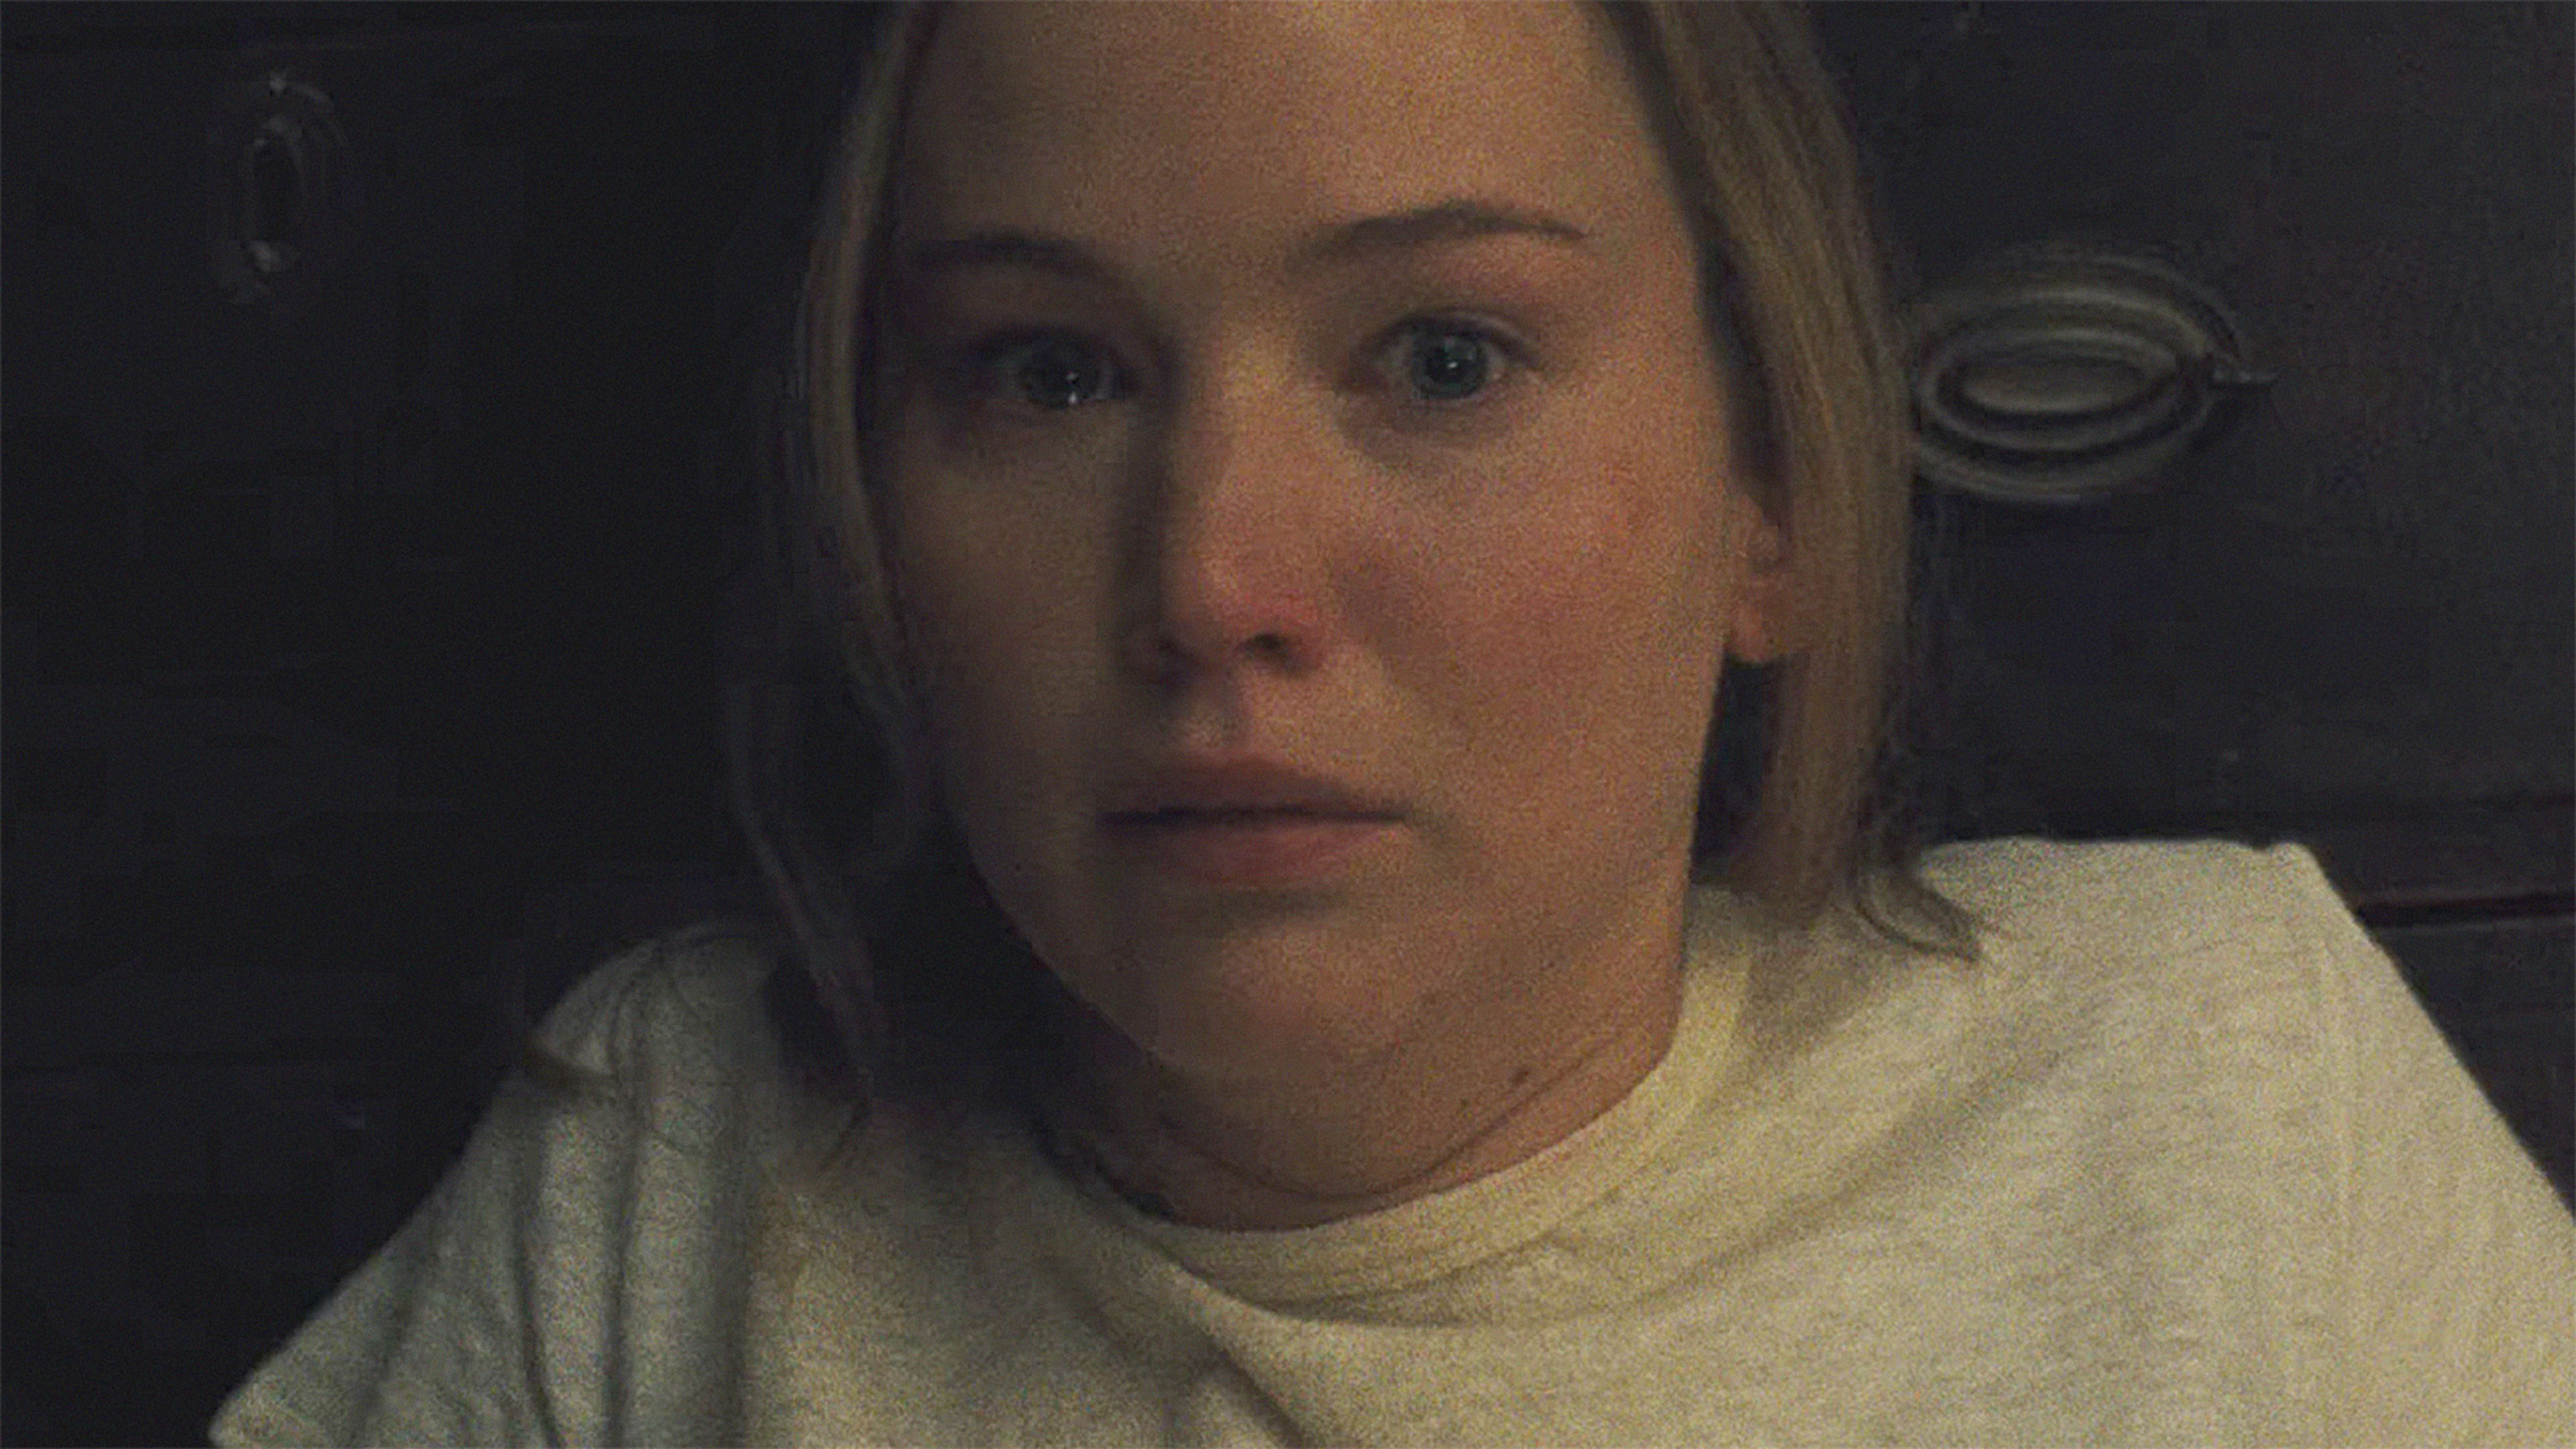 Watch Jennifer Lawrence Freak Out In The First Trailer For “mother!”